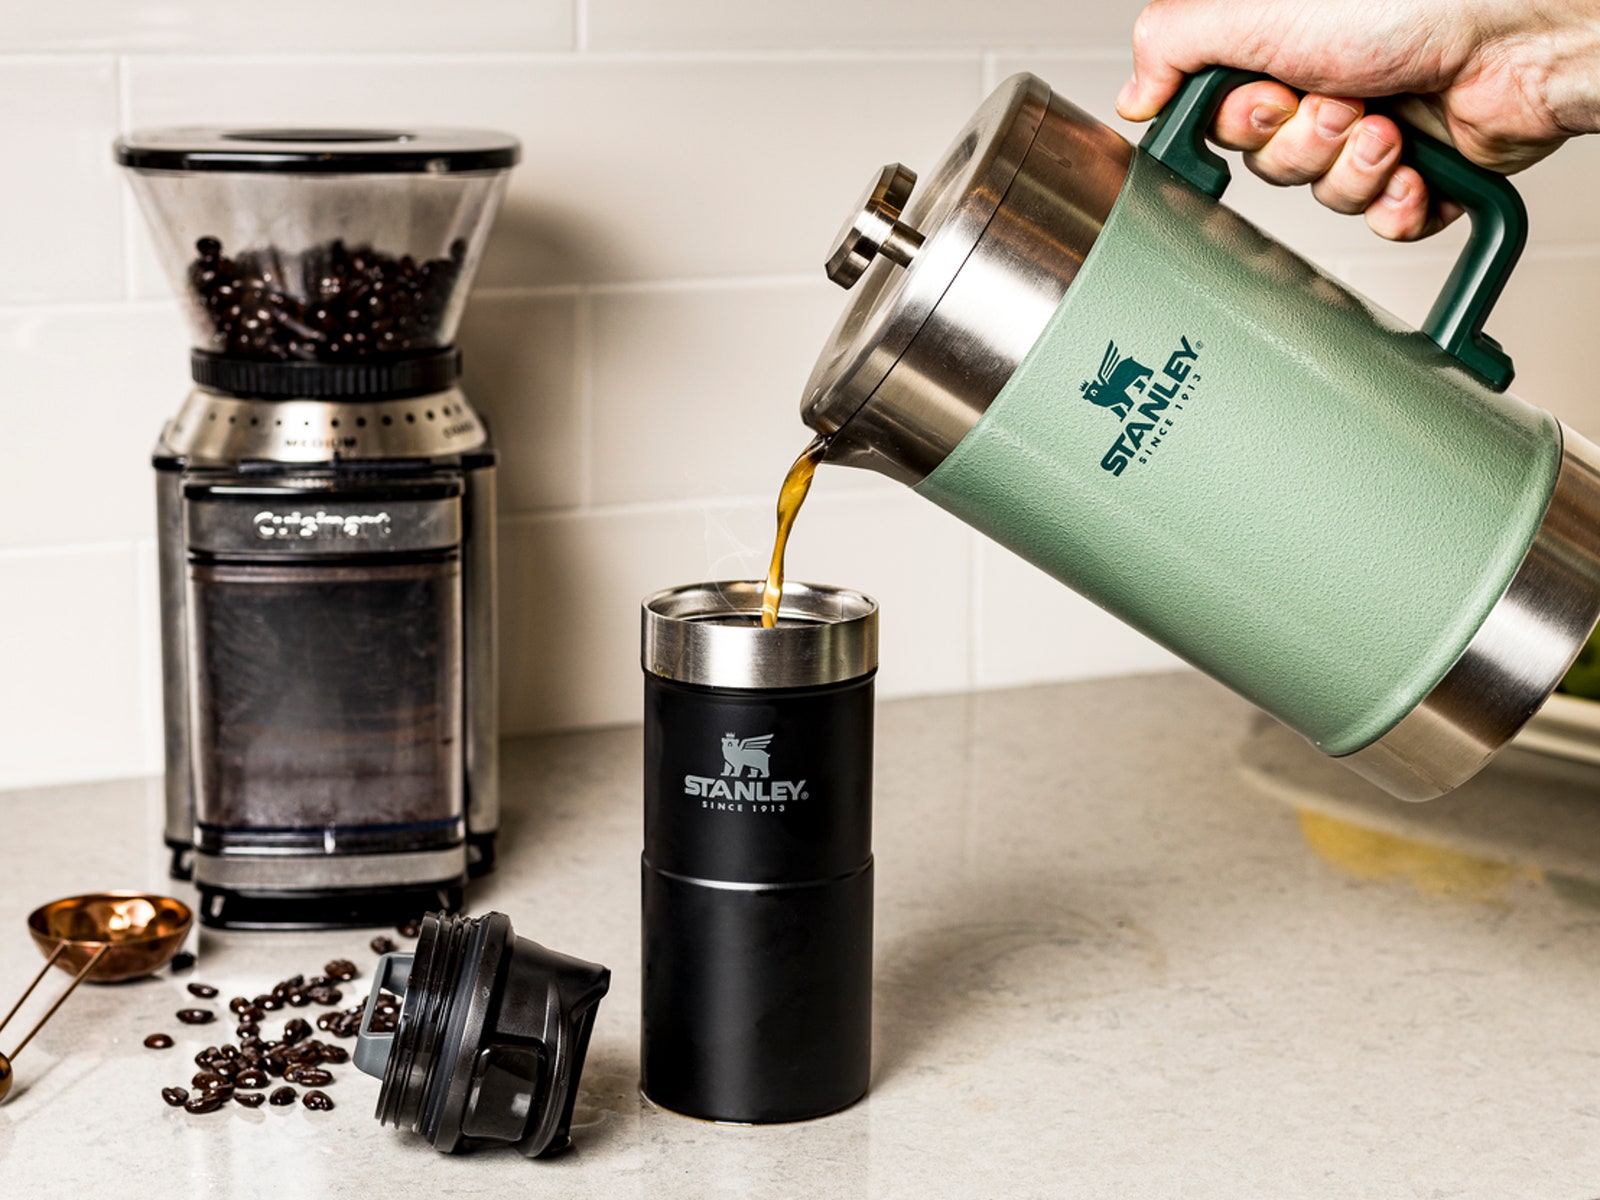 Coffee from a french press being poured into a mug coffee beans and grinder on a kitchen counter